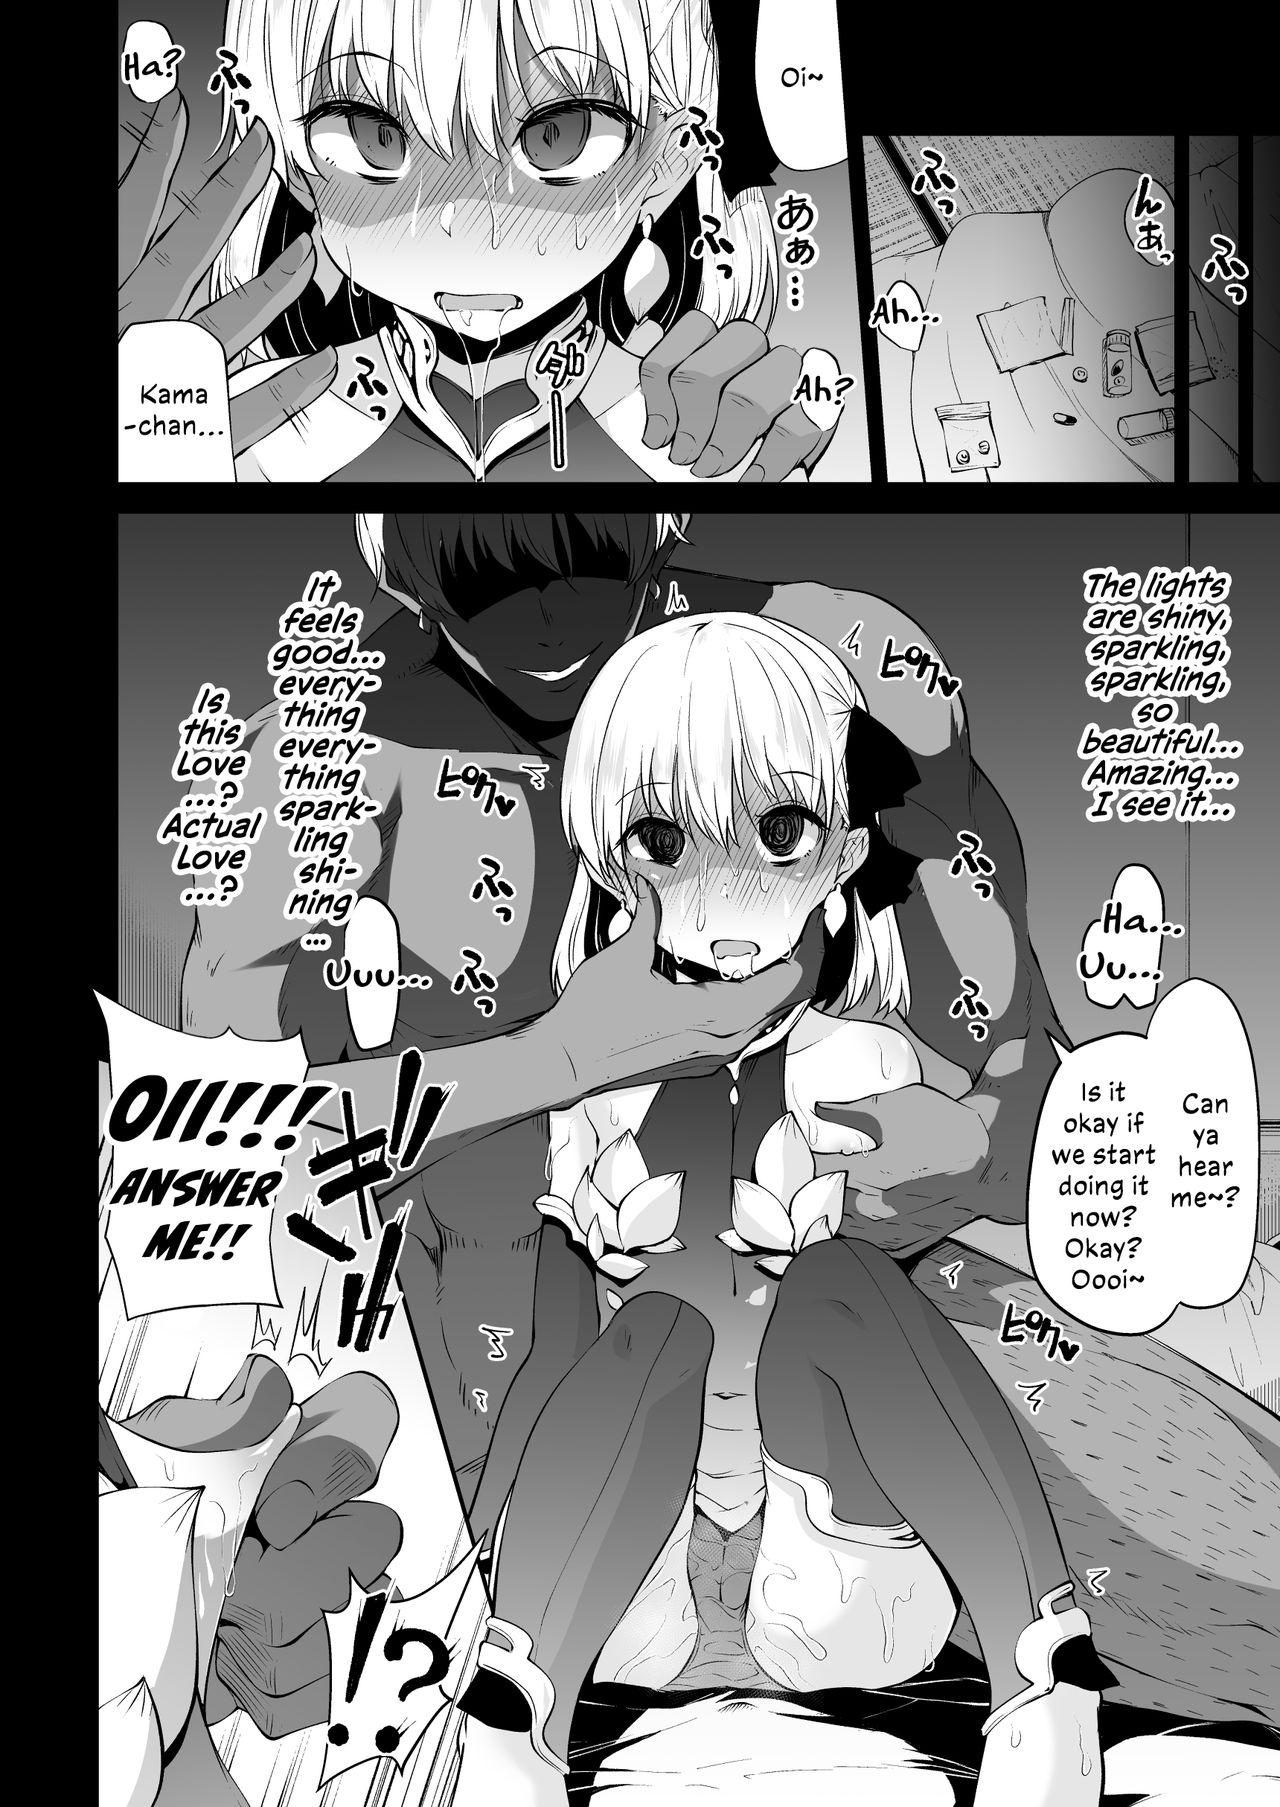 Sucking Cock [Kitsuneya (Leafy)] Kama-chan to Love-prescription | Kama-chan's Prescription of Love (Fate/Grand Order) [English] [Melty Scans] [Digital] - Fate grand order Shemale Sex - Page 12